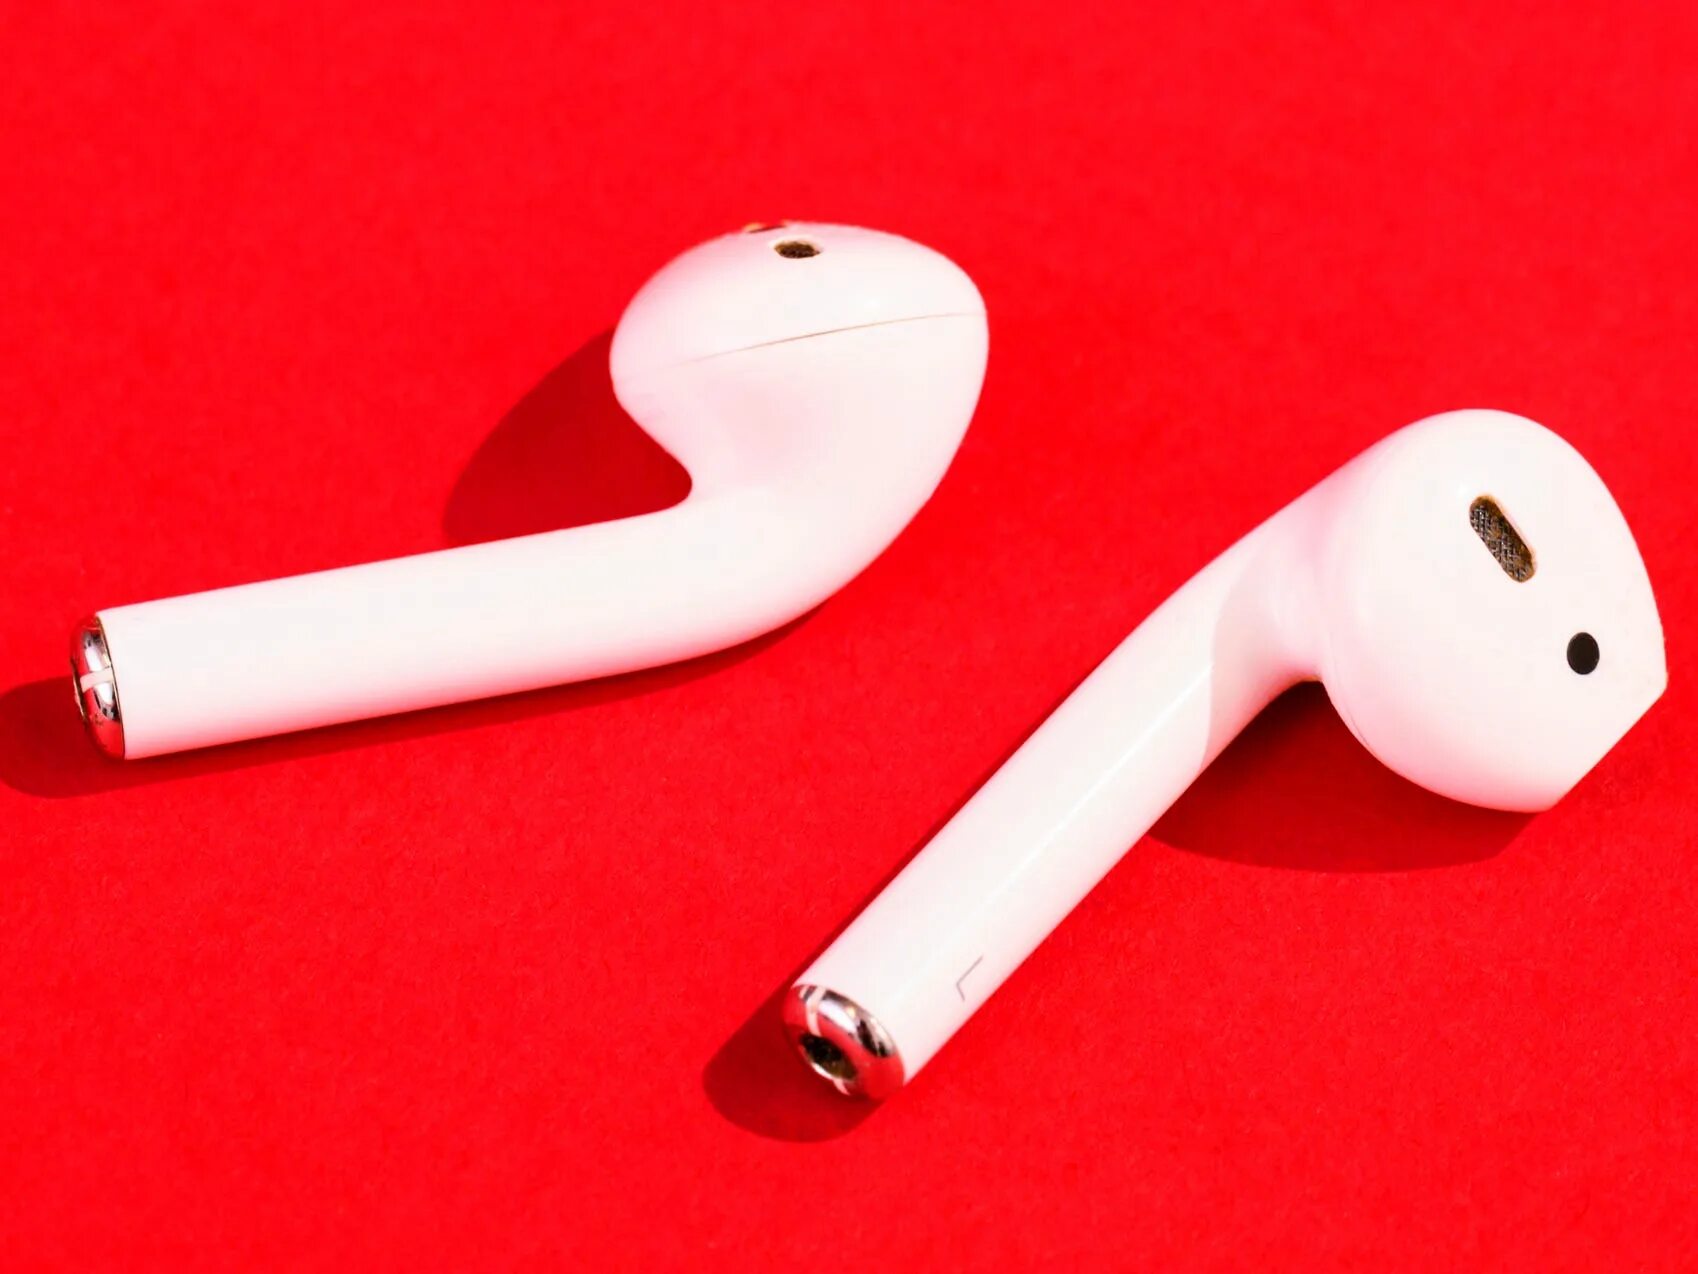 Apple AIRPODS. AIRPODS 2. AIRPODS 2 реклама. AIRPODS красные.